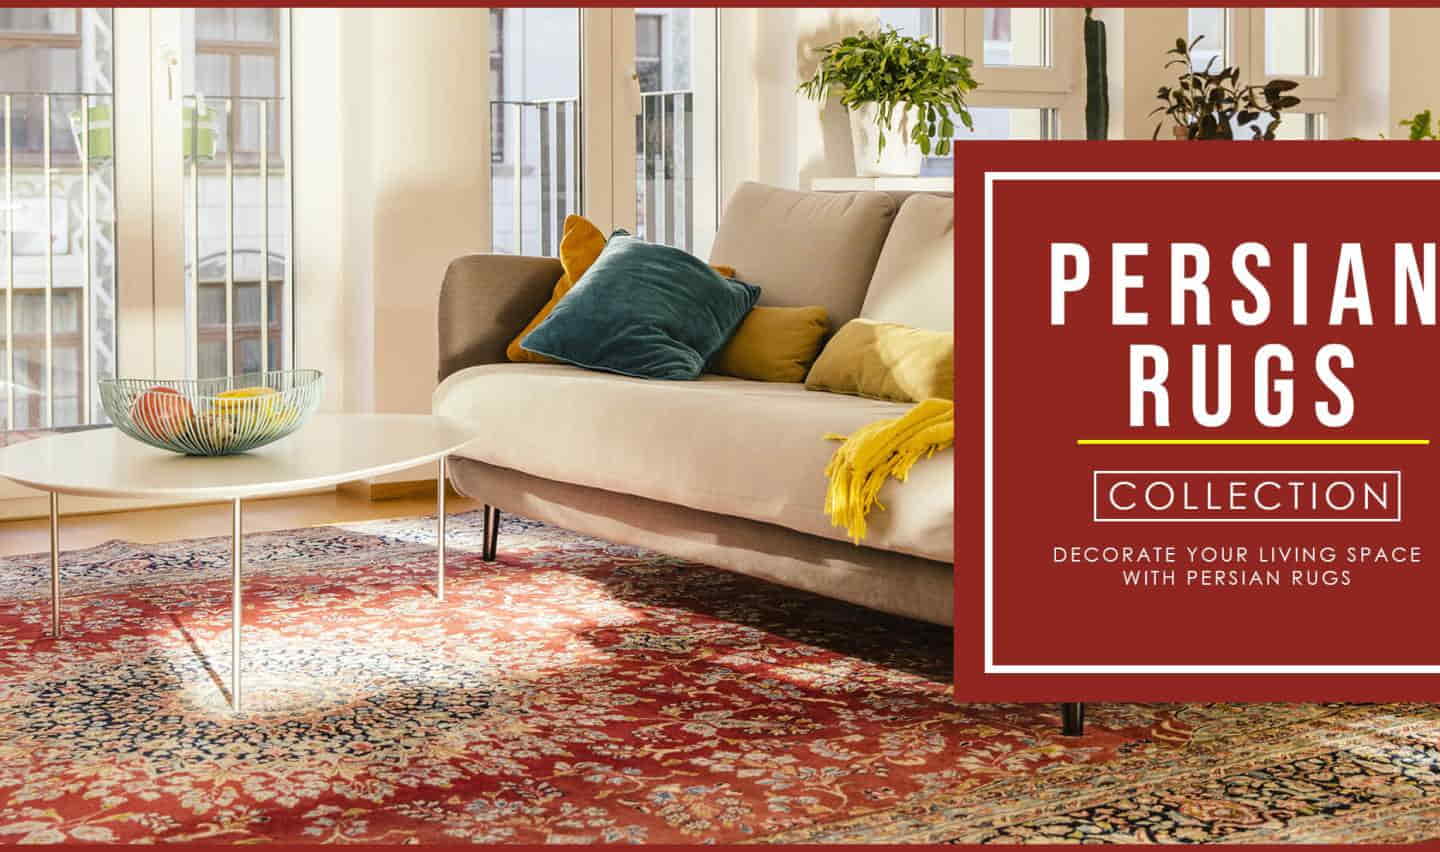 How To Decorate Your Space With Persian Rugs